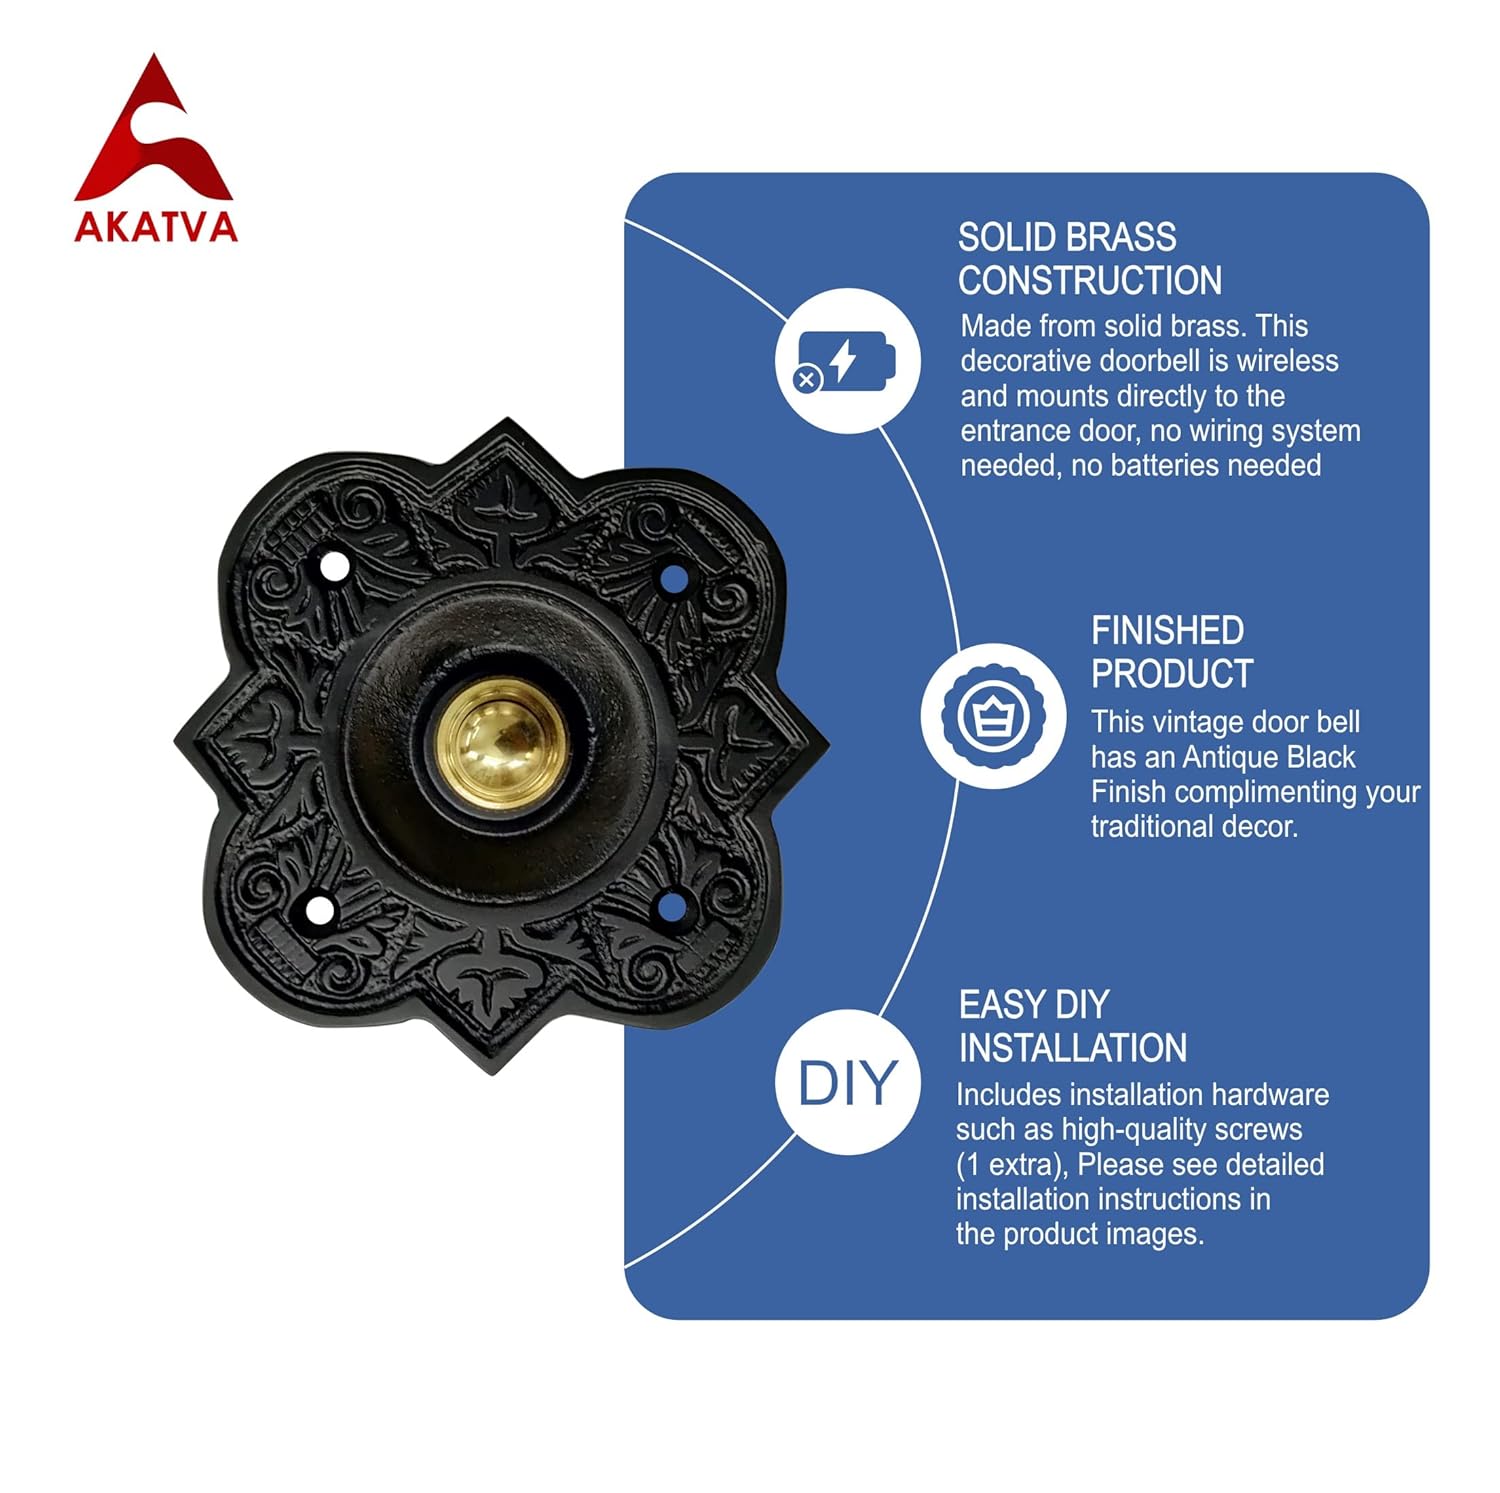 Akatva Decorative Doorbell Button – Finest Quality Bell Push Button – Easy to Install Calling Bell Button – Vintage Décor Doorbell Button Finely Hand Crafted - doorbell Wired - Antique Black Finish